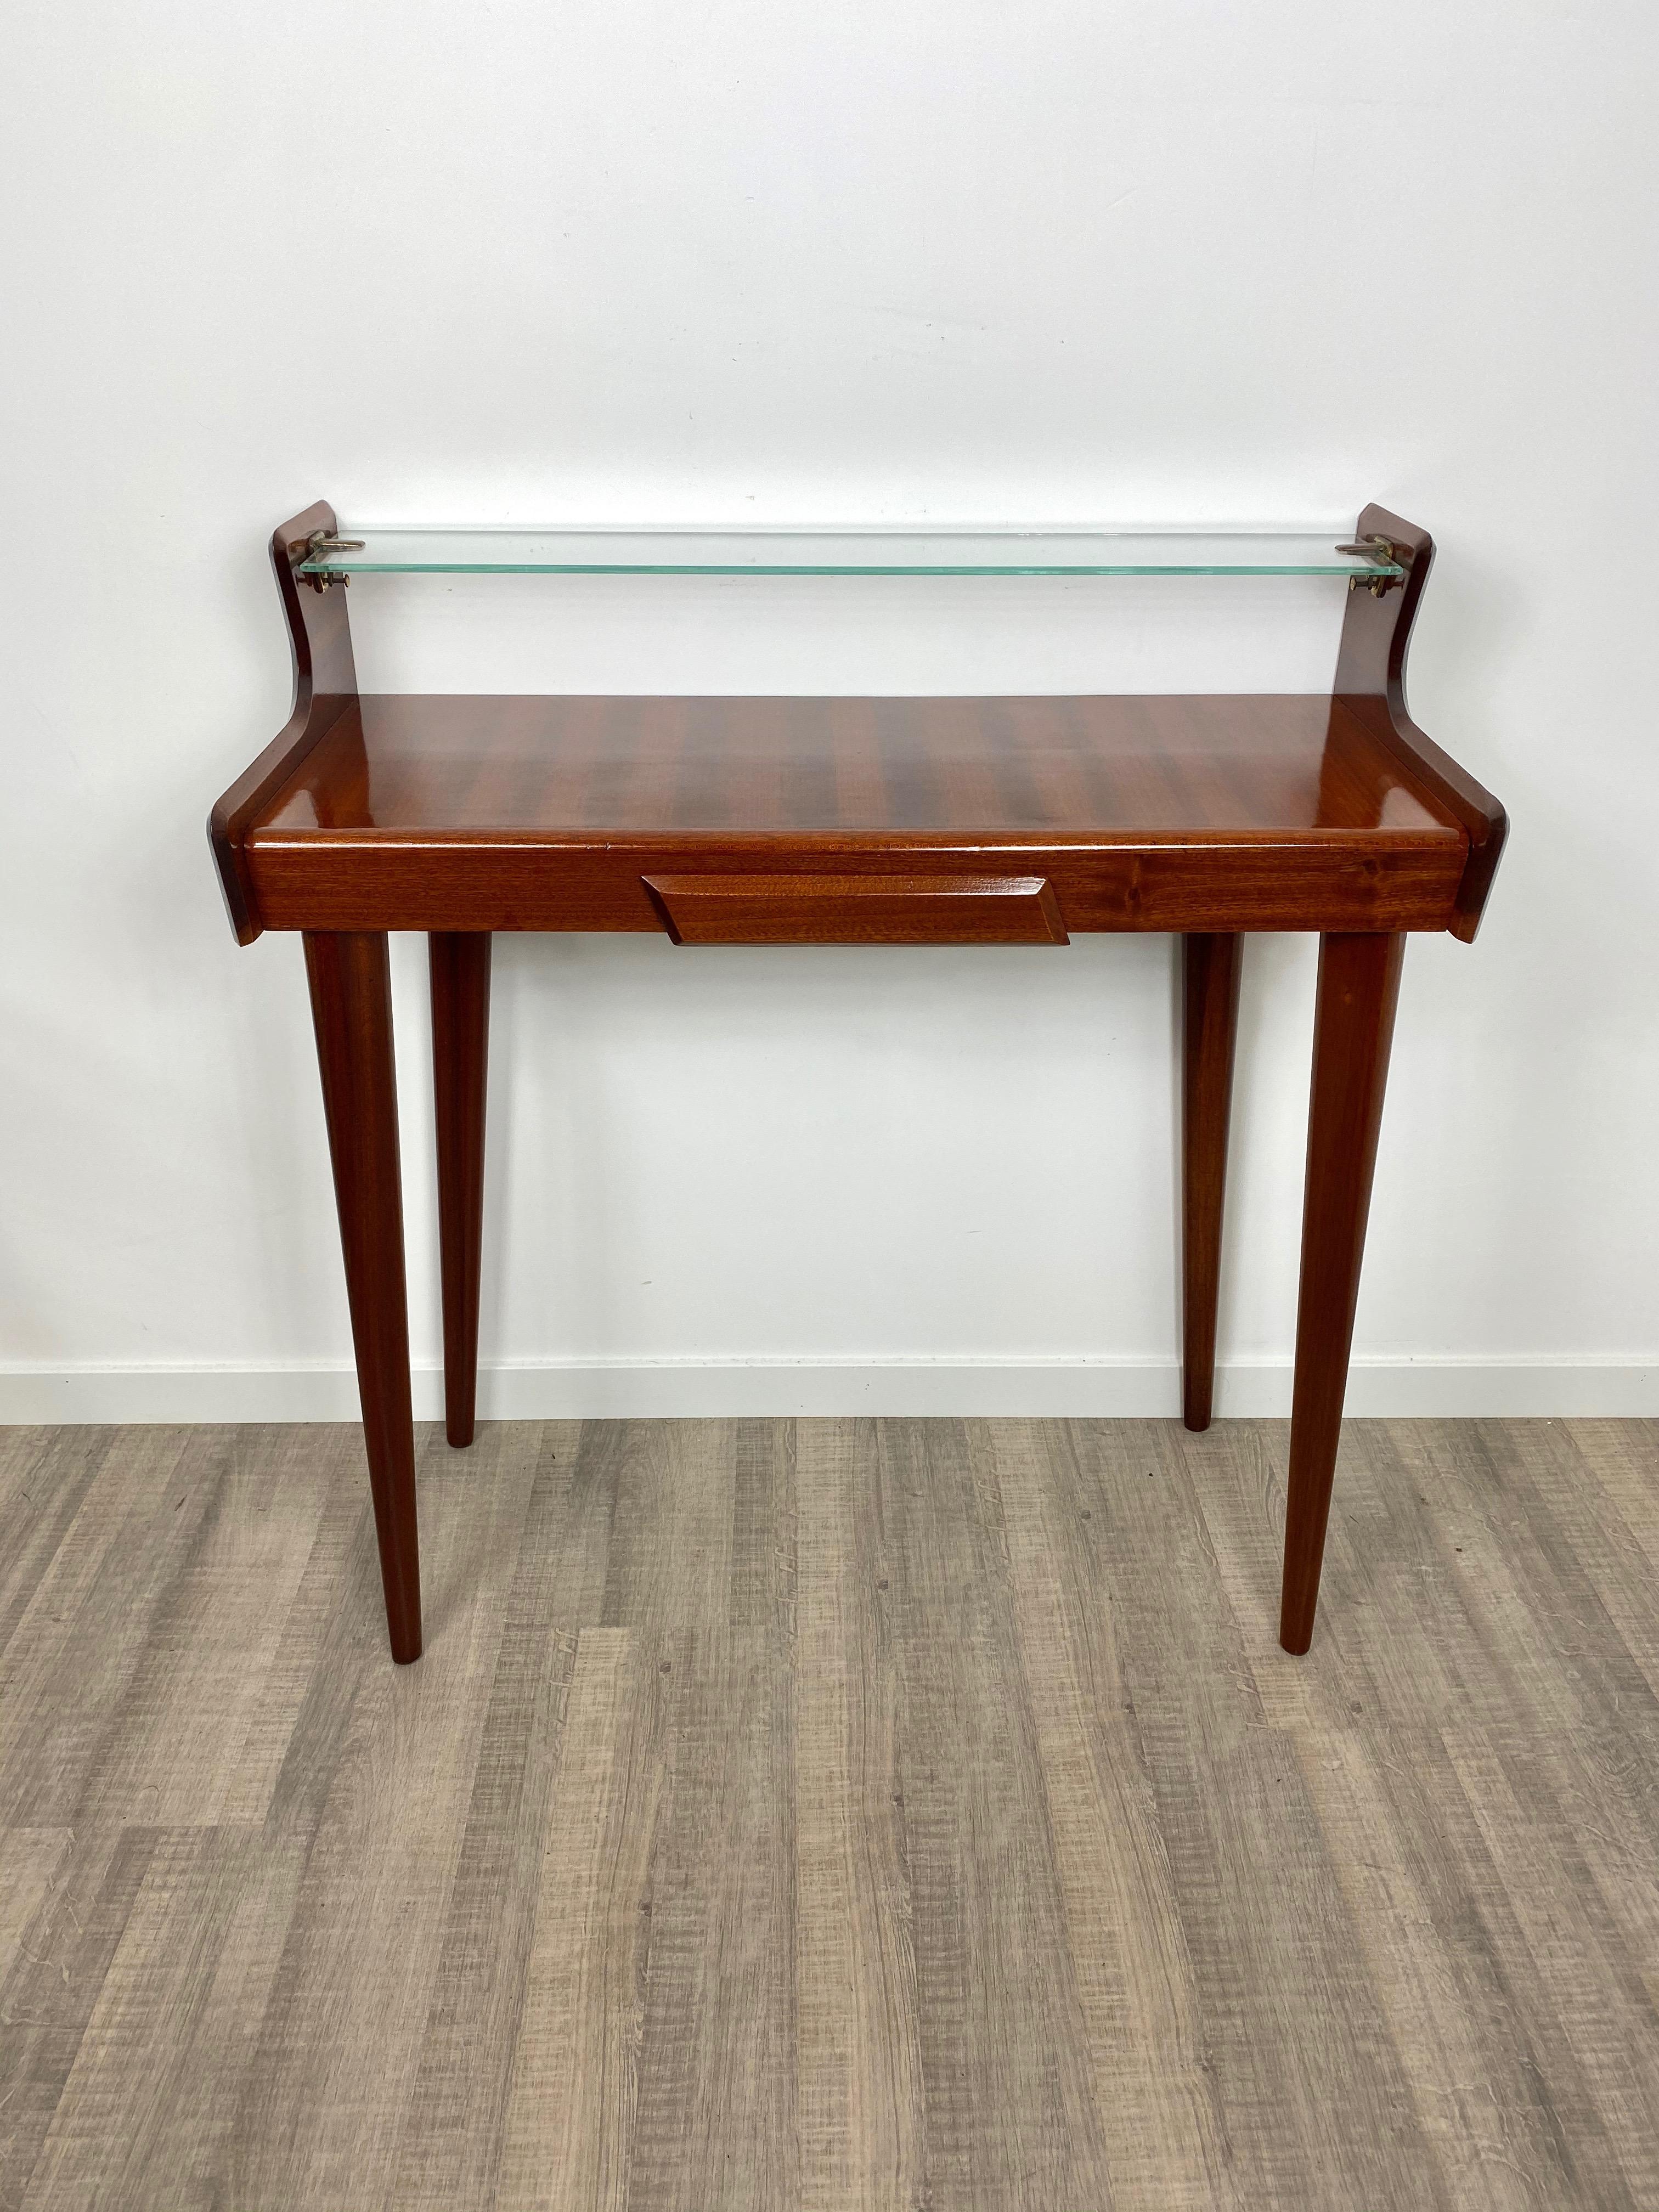 Mid-Century Modern Italian Midcentury Mahogany Wood and Glass Console Table by Carlo de Carli 1950s For Sale